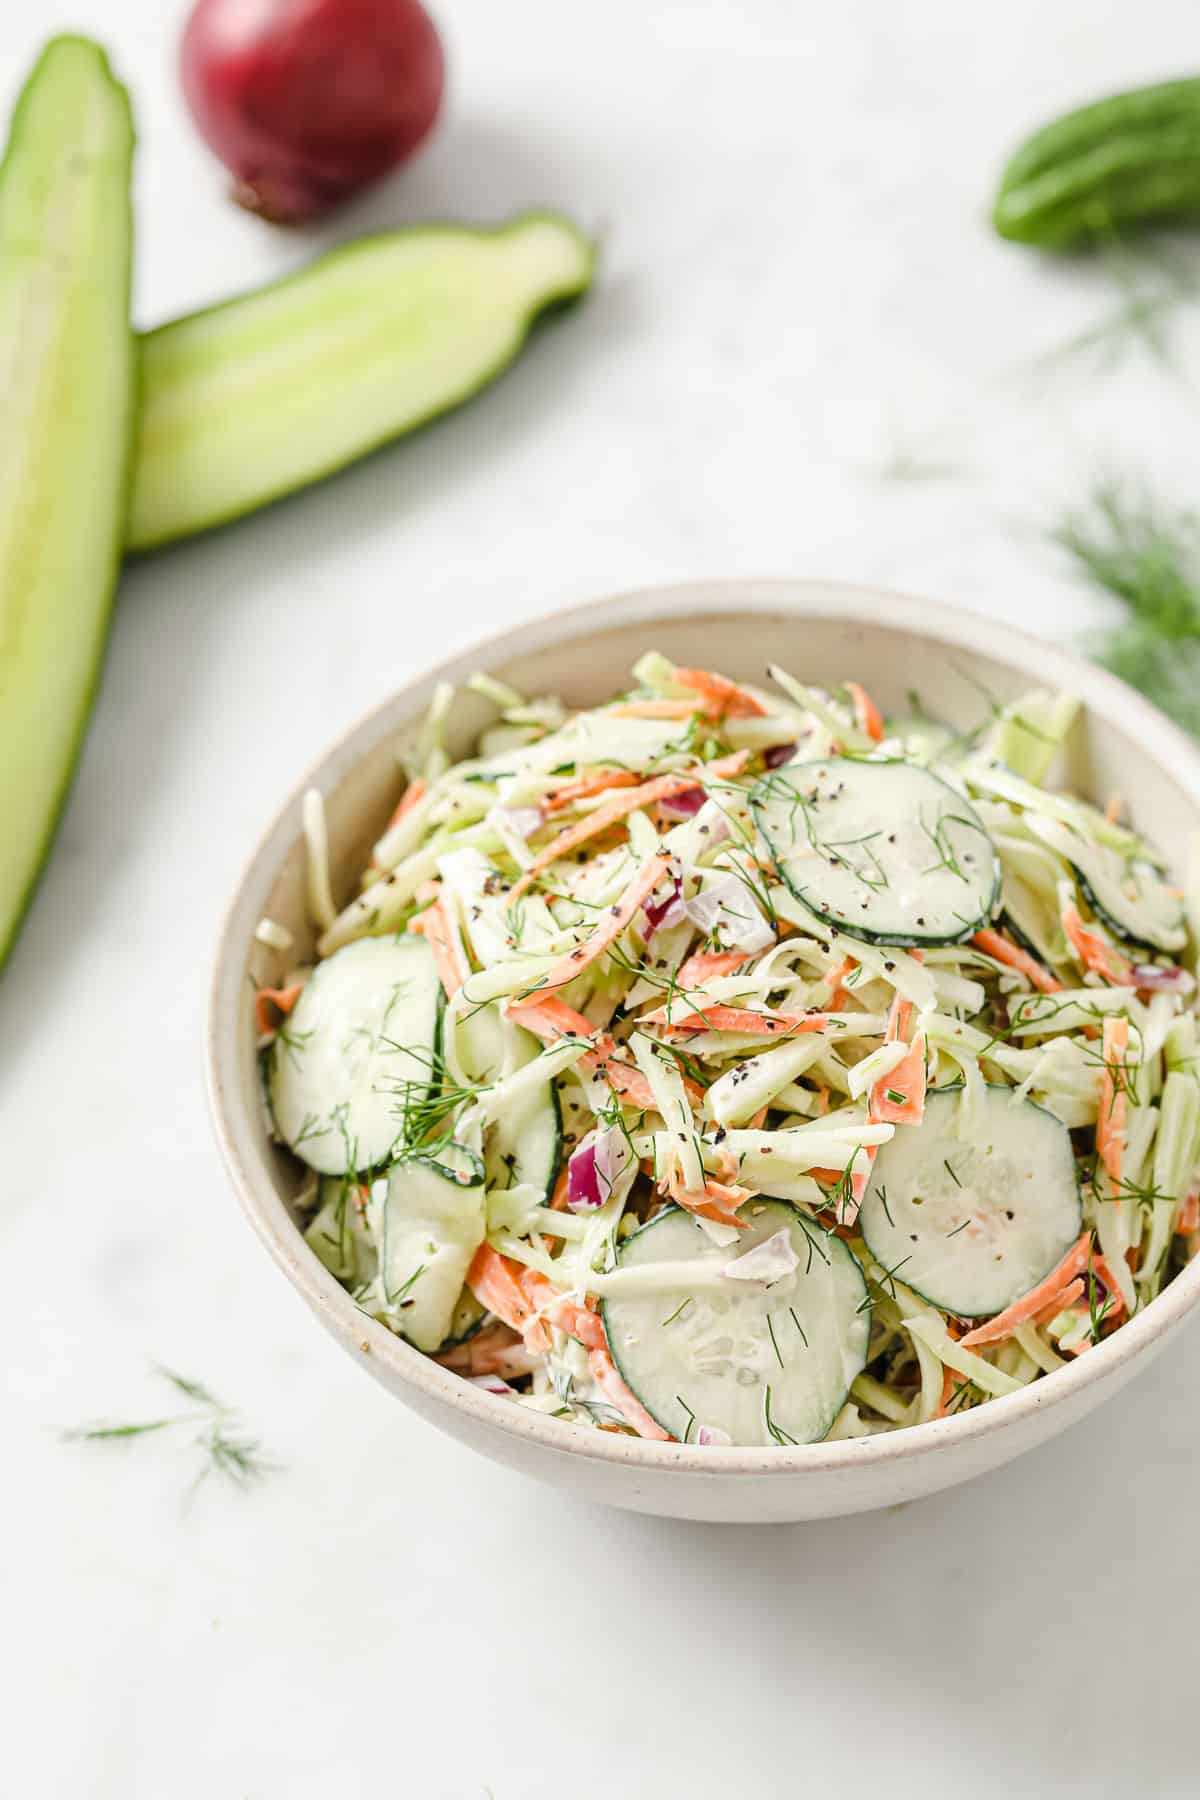 a bowl of paleo coleslaw with broccoli slaw, cucumber, mayo, red onion, dill, garlic, salt and pepper